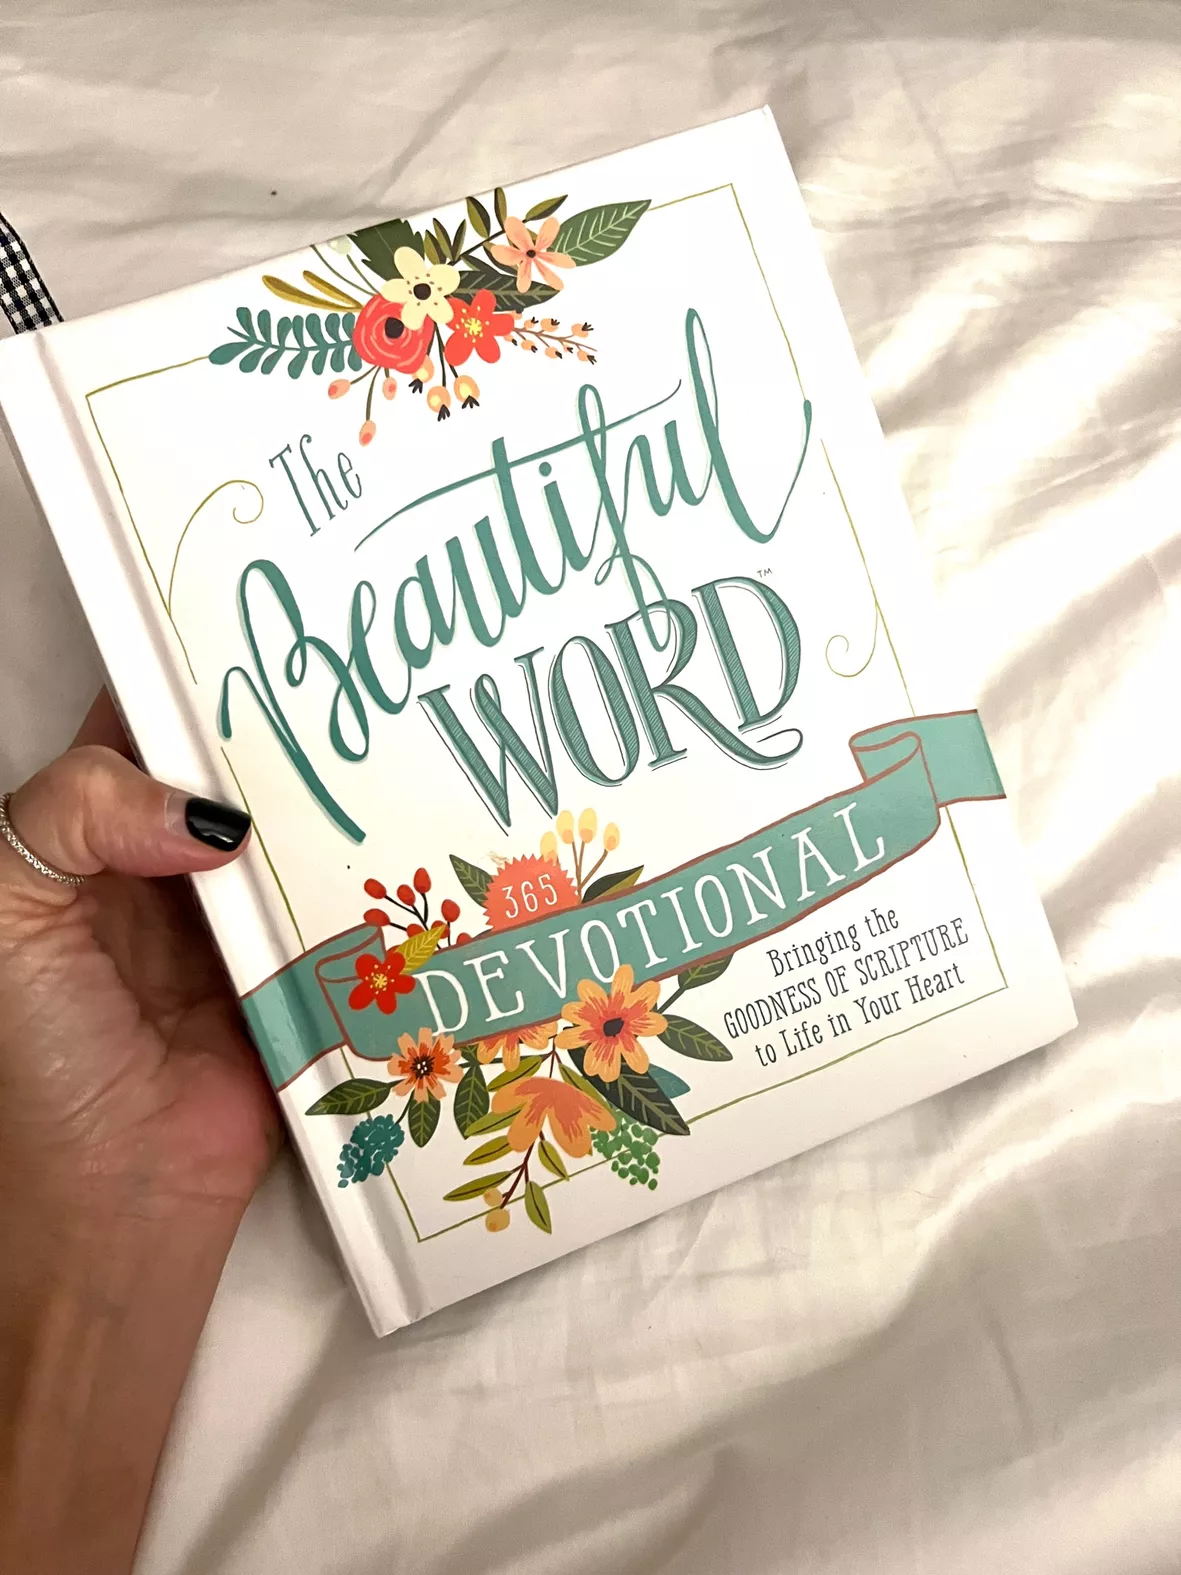 Devotional Coloring book for Women: book by Balloon Publishing